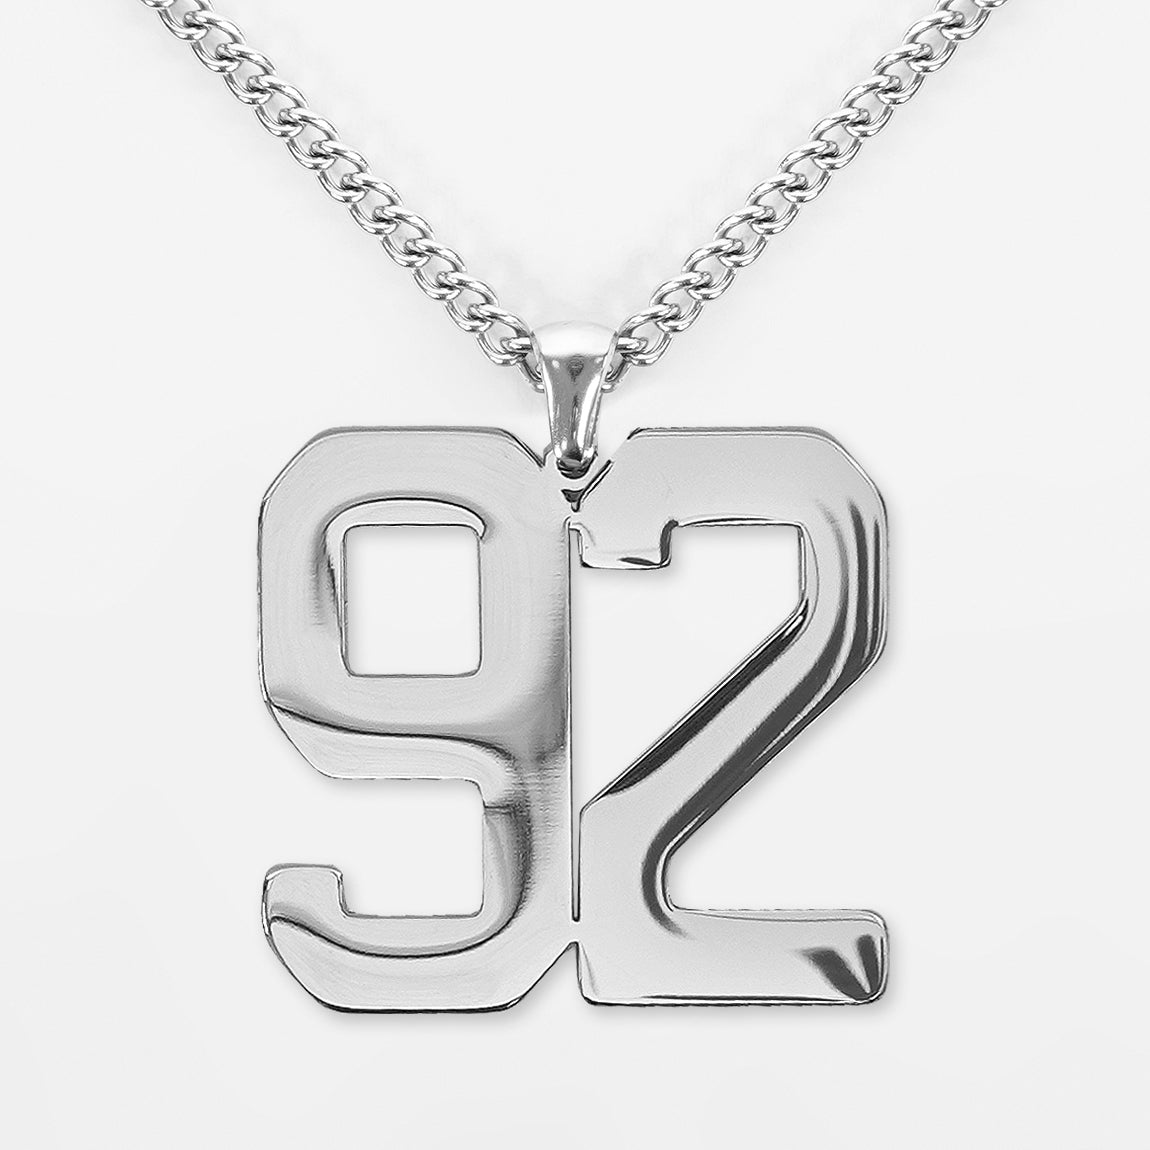 92 Number Pendant with Chain Necklace - Stainless Steel